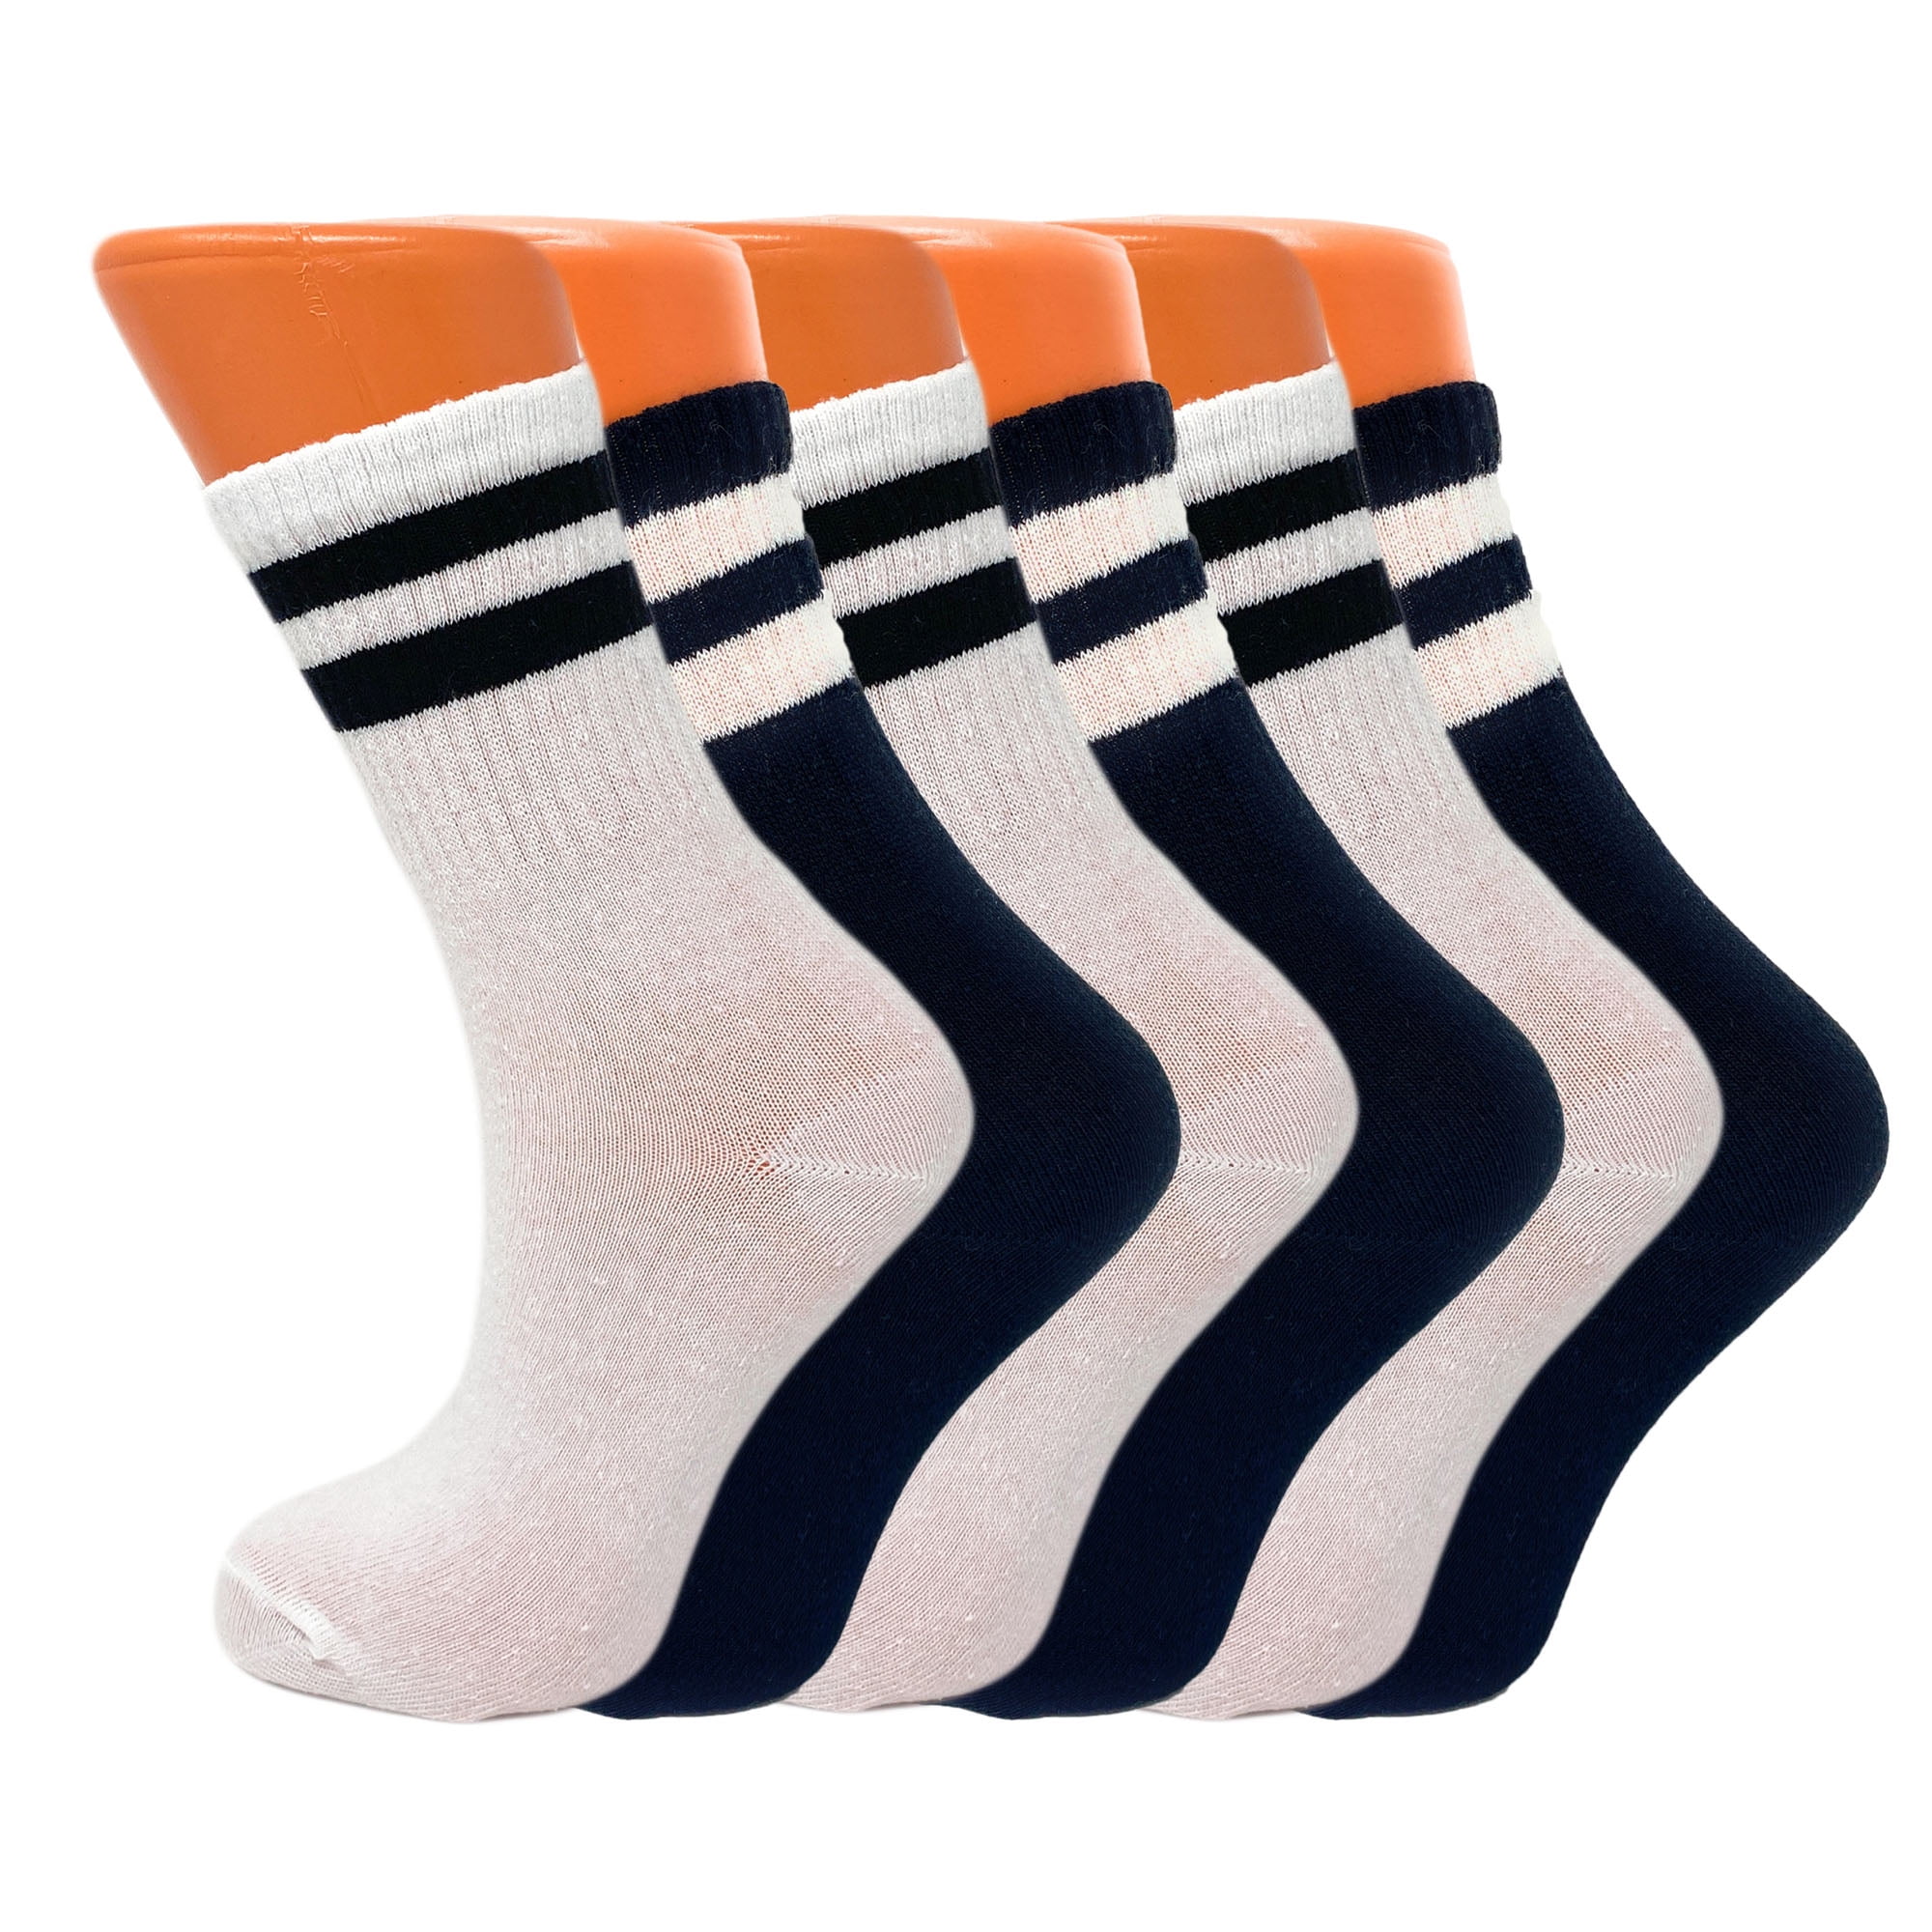 6-12 Pairs New Fashion Cotton Women Ankle Low Cut School Casual Socks 9-11 RB 